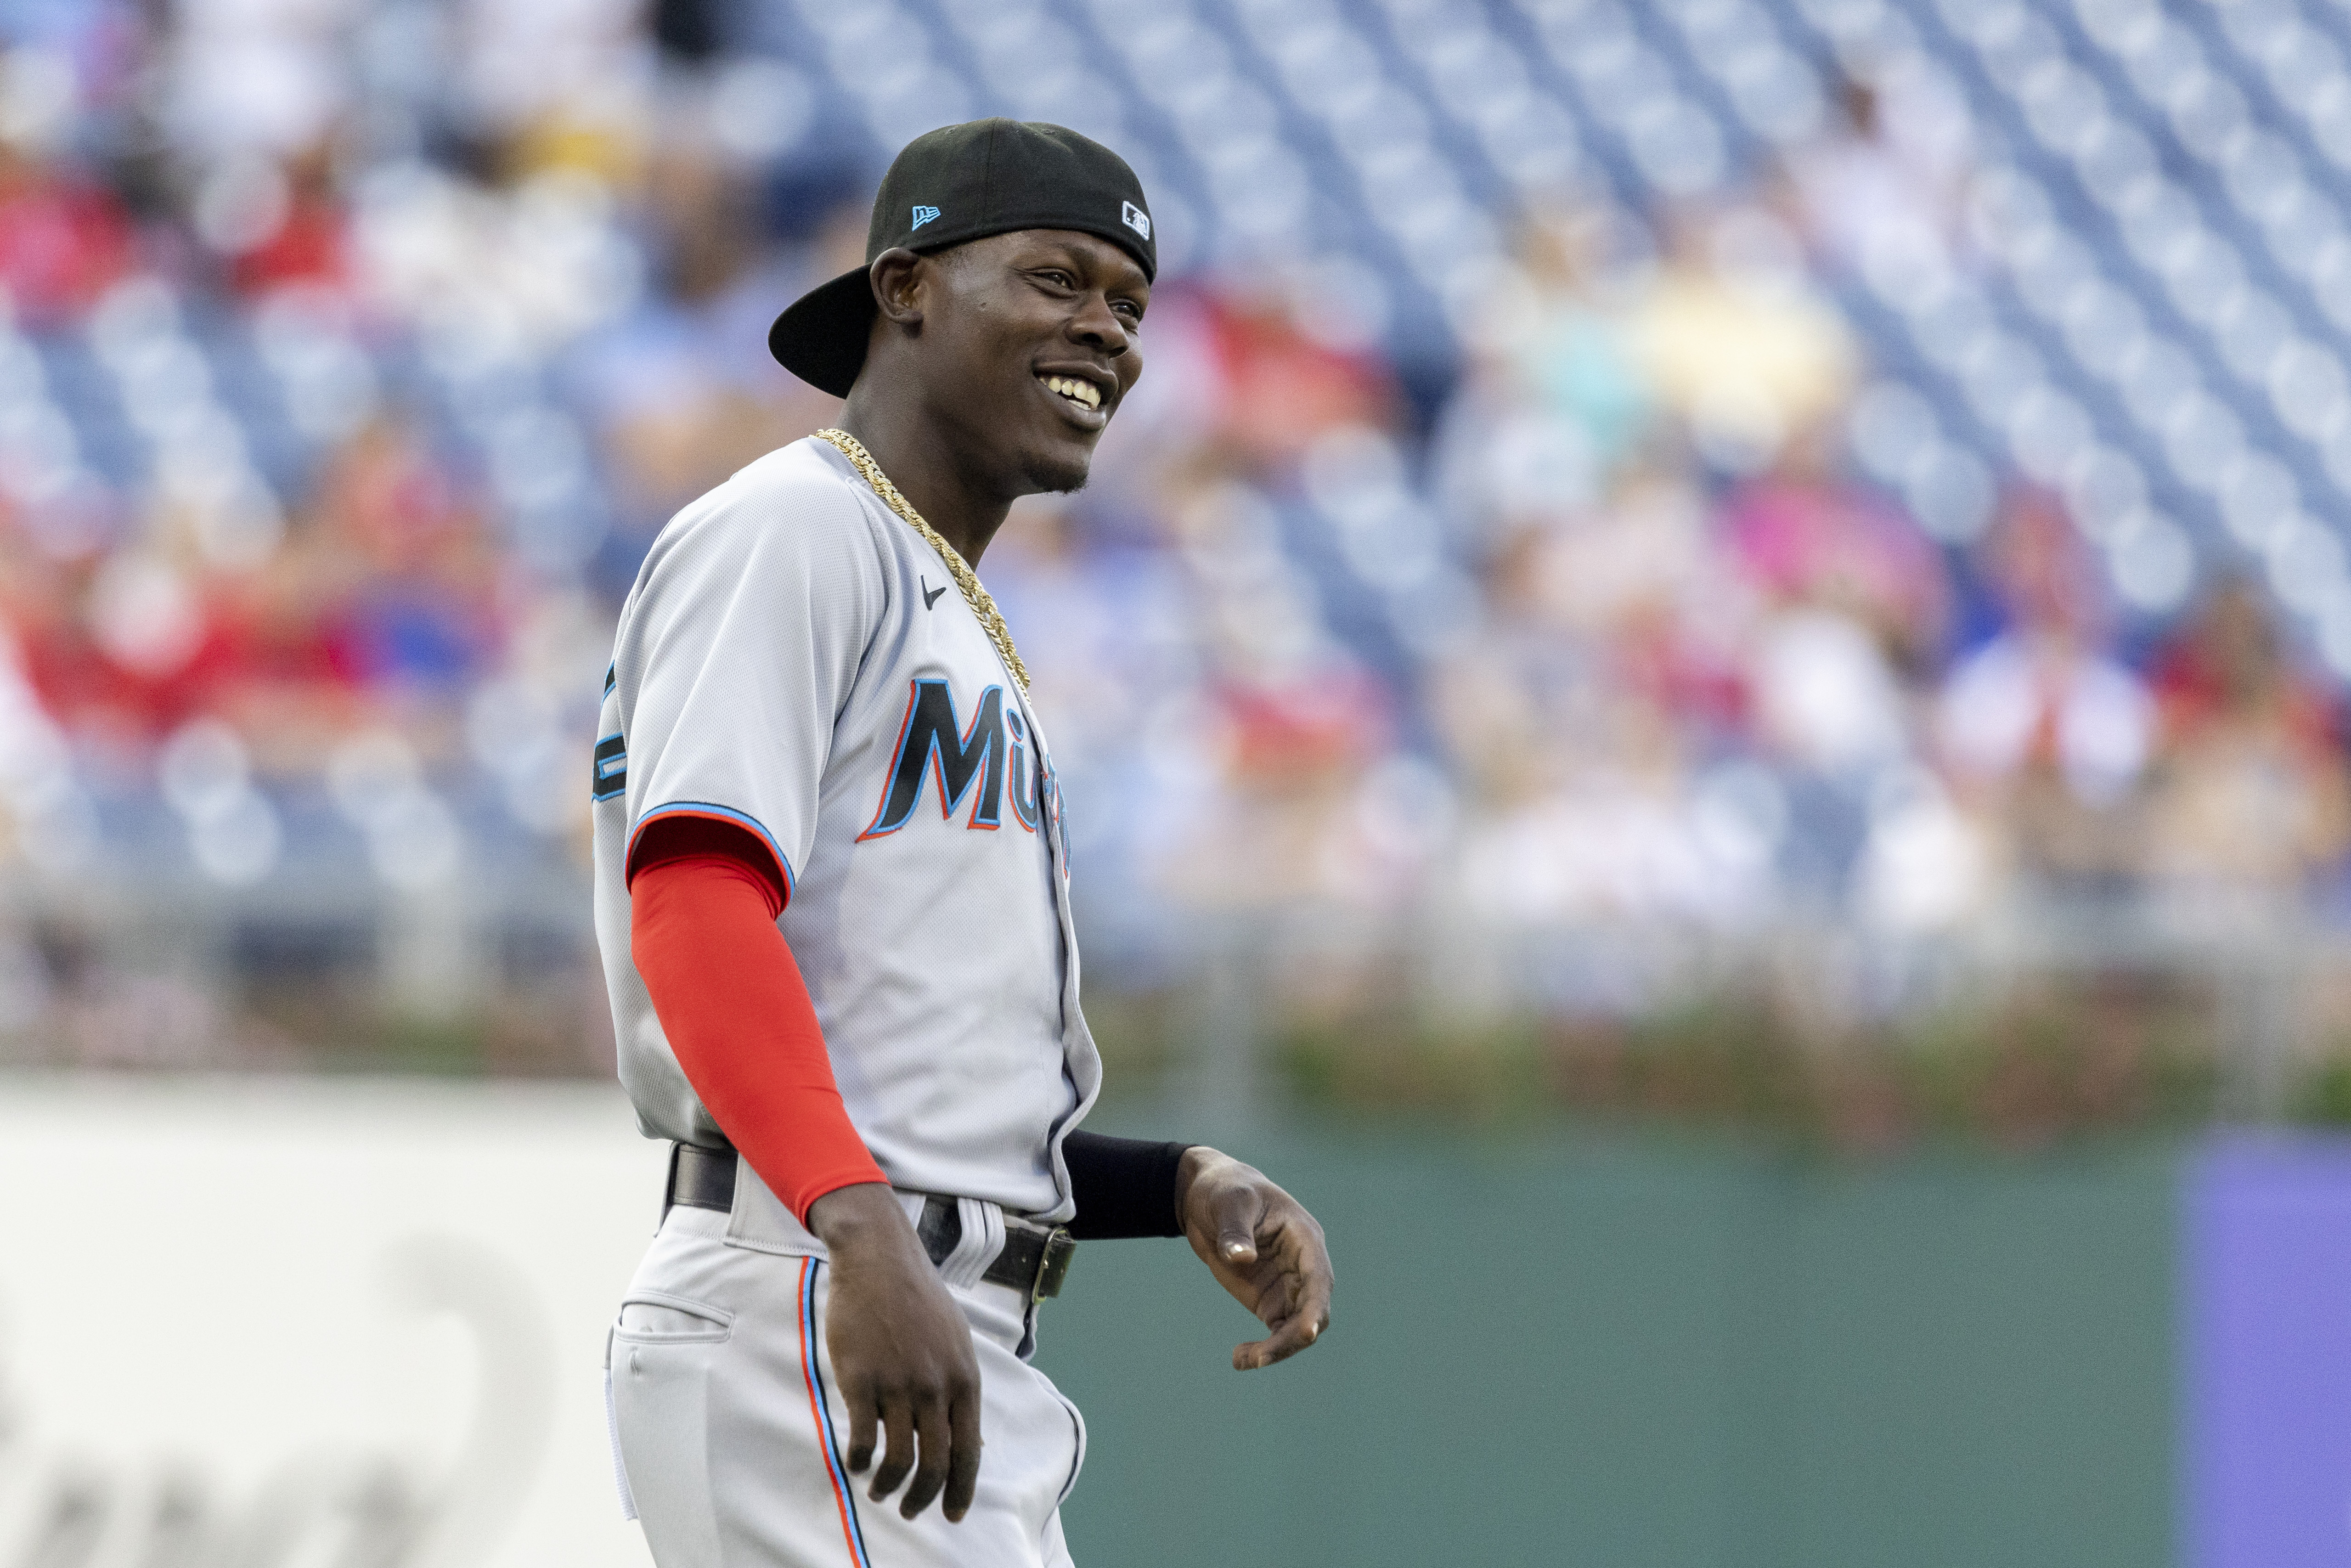 MIAMI MARLINS: How They Went From Lowly Florida Marlins to New Look,  Revitalized Miami Marlins